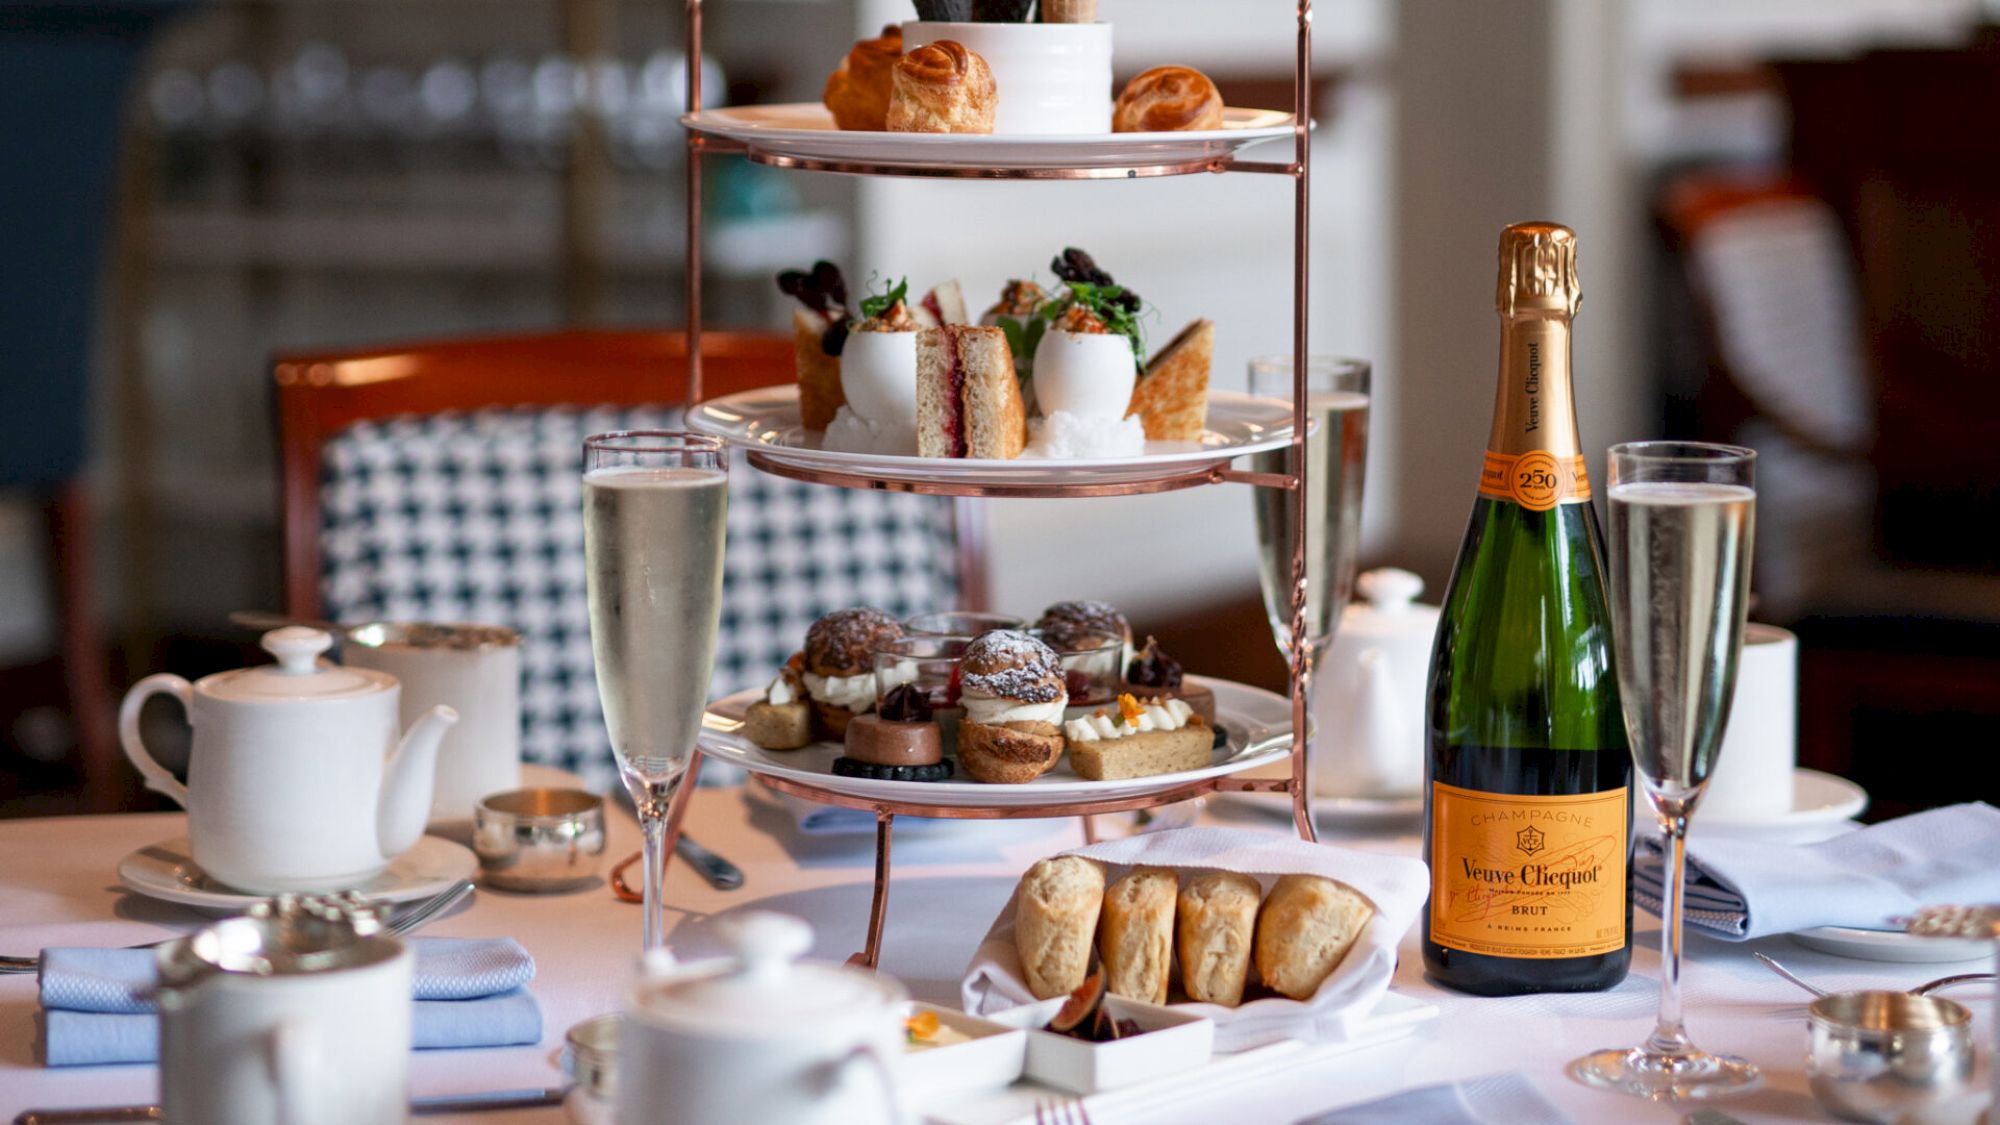 An elegant afternoon tea setup with pastries, champagne, and a teapot.